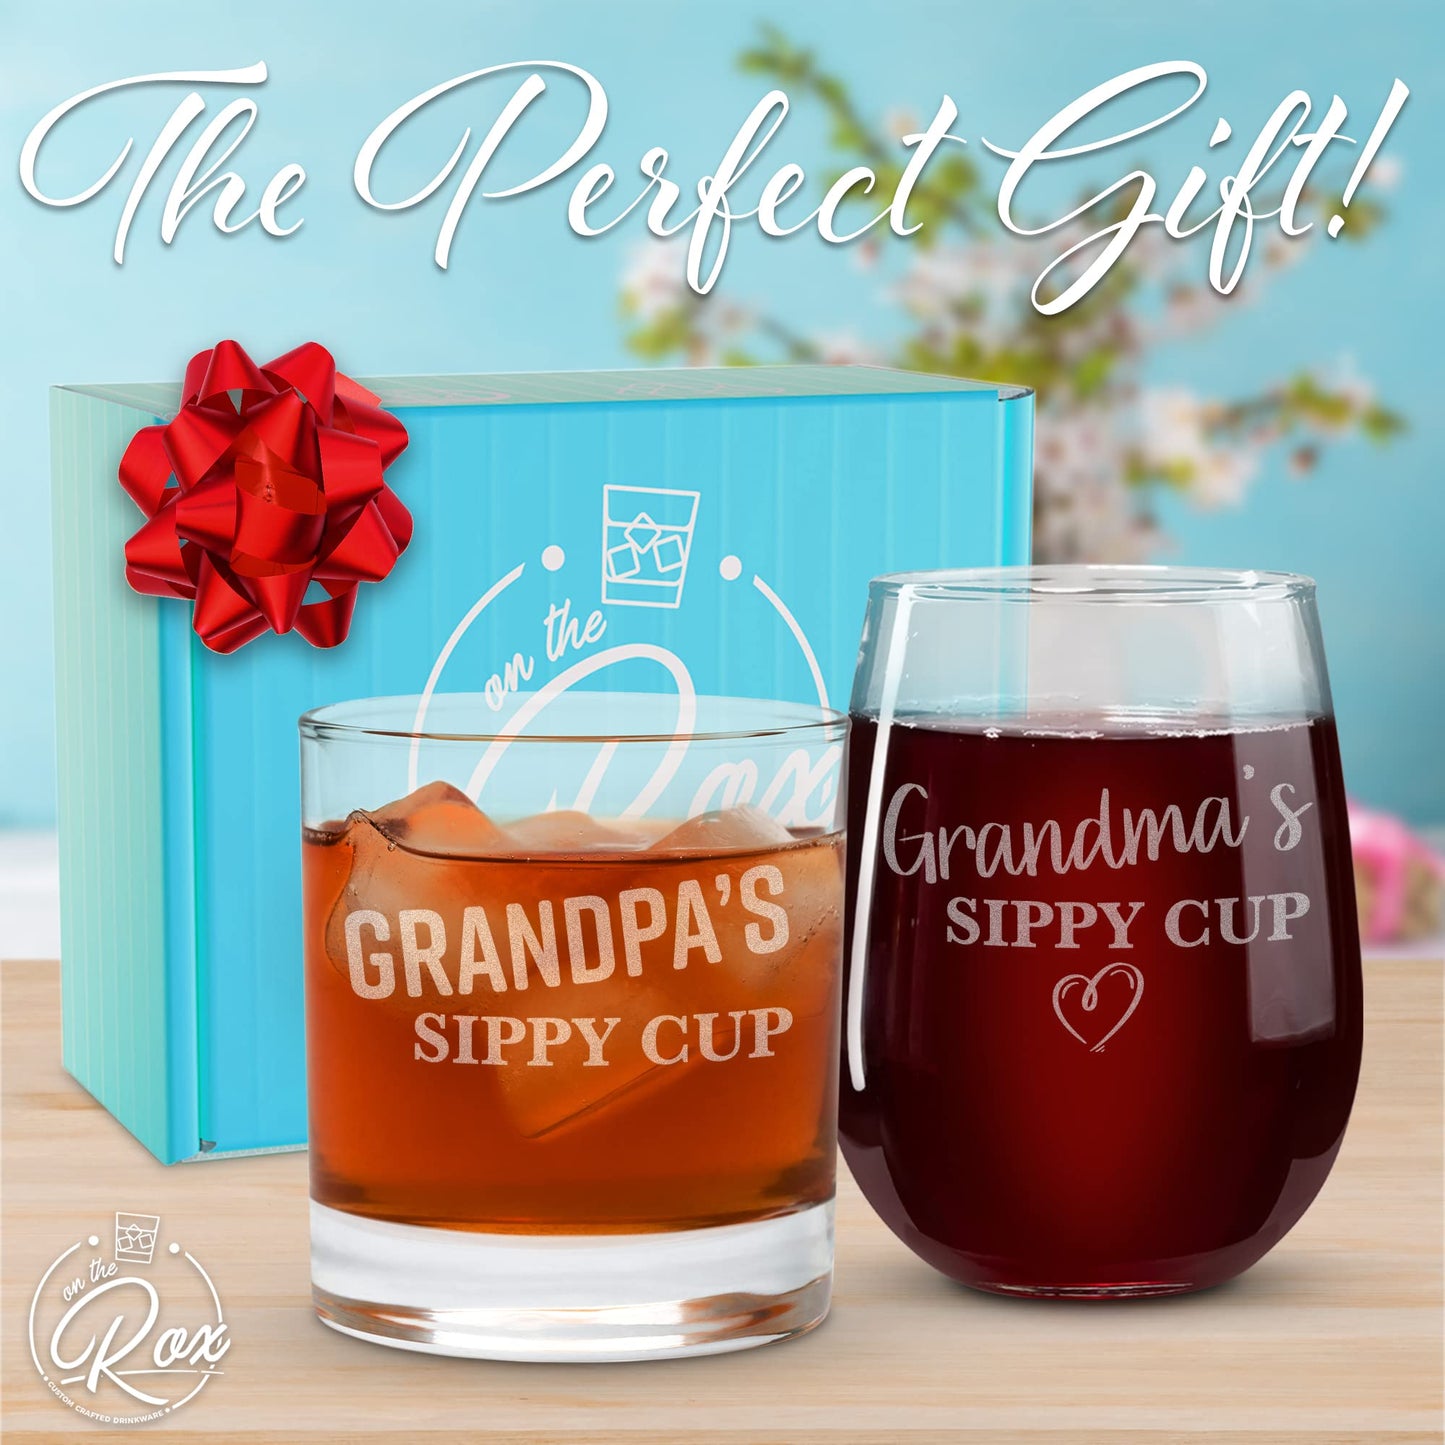 On The Rox Drinks Grandma and Grandpa Gifts -  17oz Grandma's and 11oz Grandpa's Sippy Cups, Set of 2- Gift Wine and Whiskey Glasses - Gift Ideas for First-Time Grandmother or New Grandparents